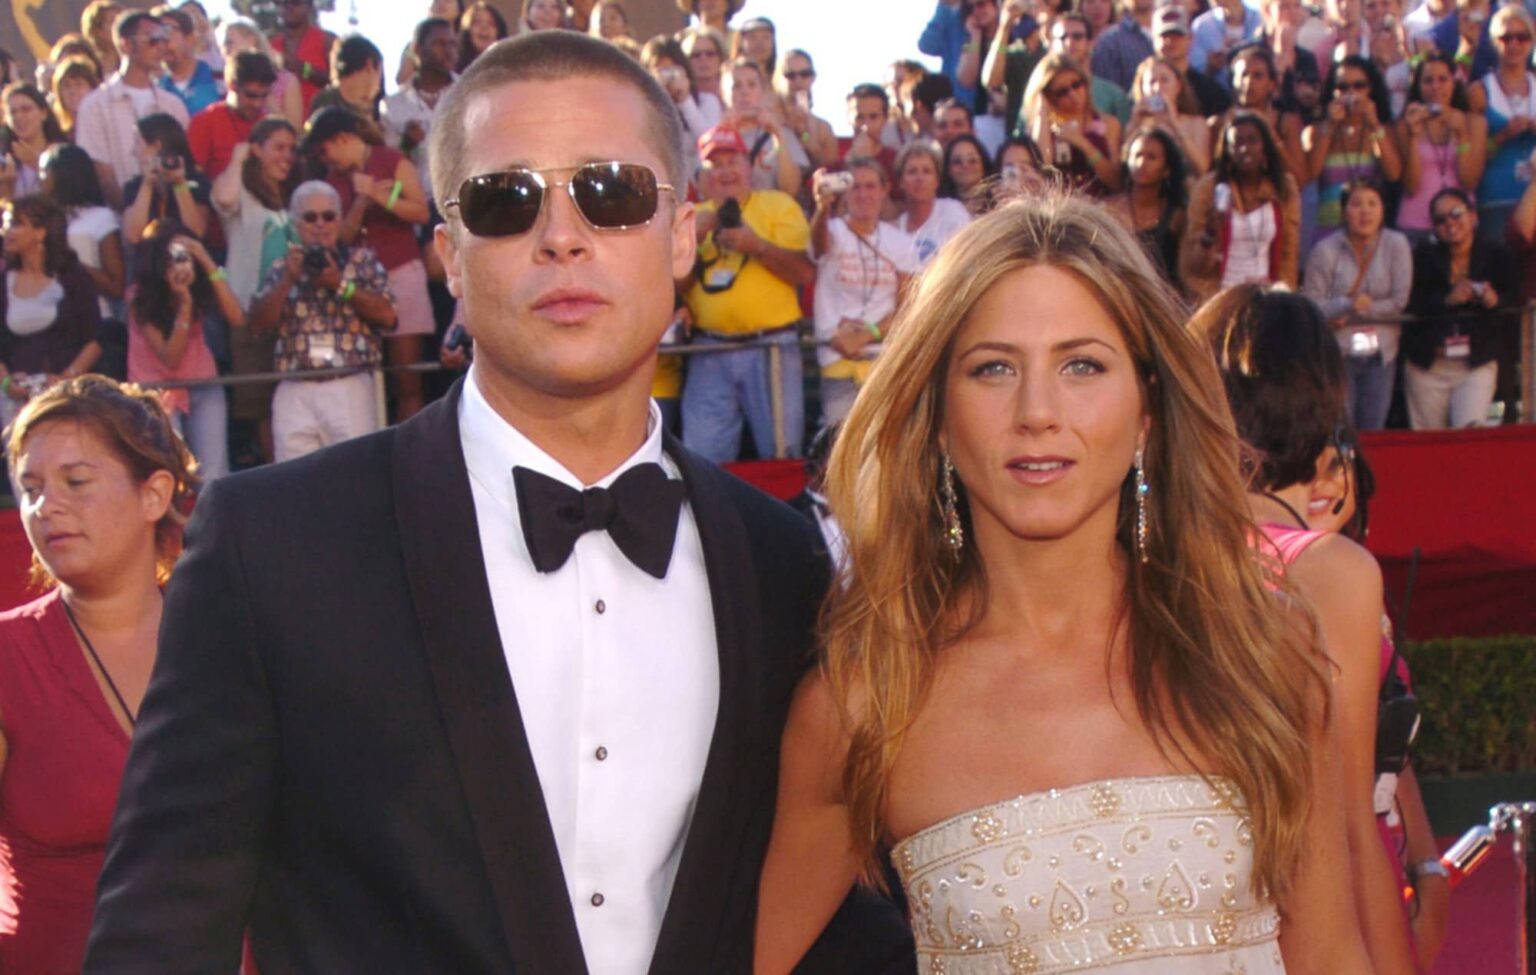 Braniston? Anipitt? Could they be back? Get ready for some serious shipping as we try to answer the question: is Brad Pitt dating Jennifer Aniston?